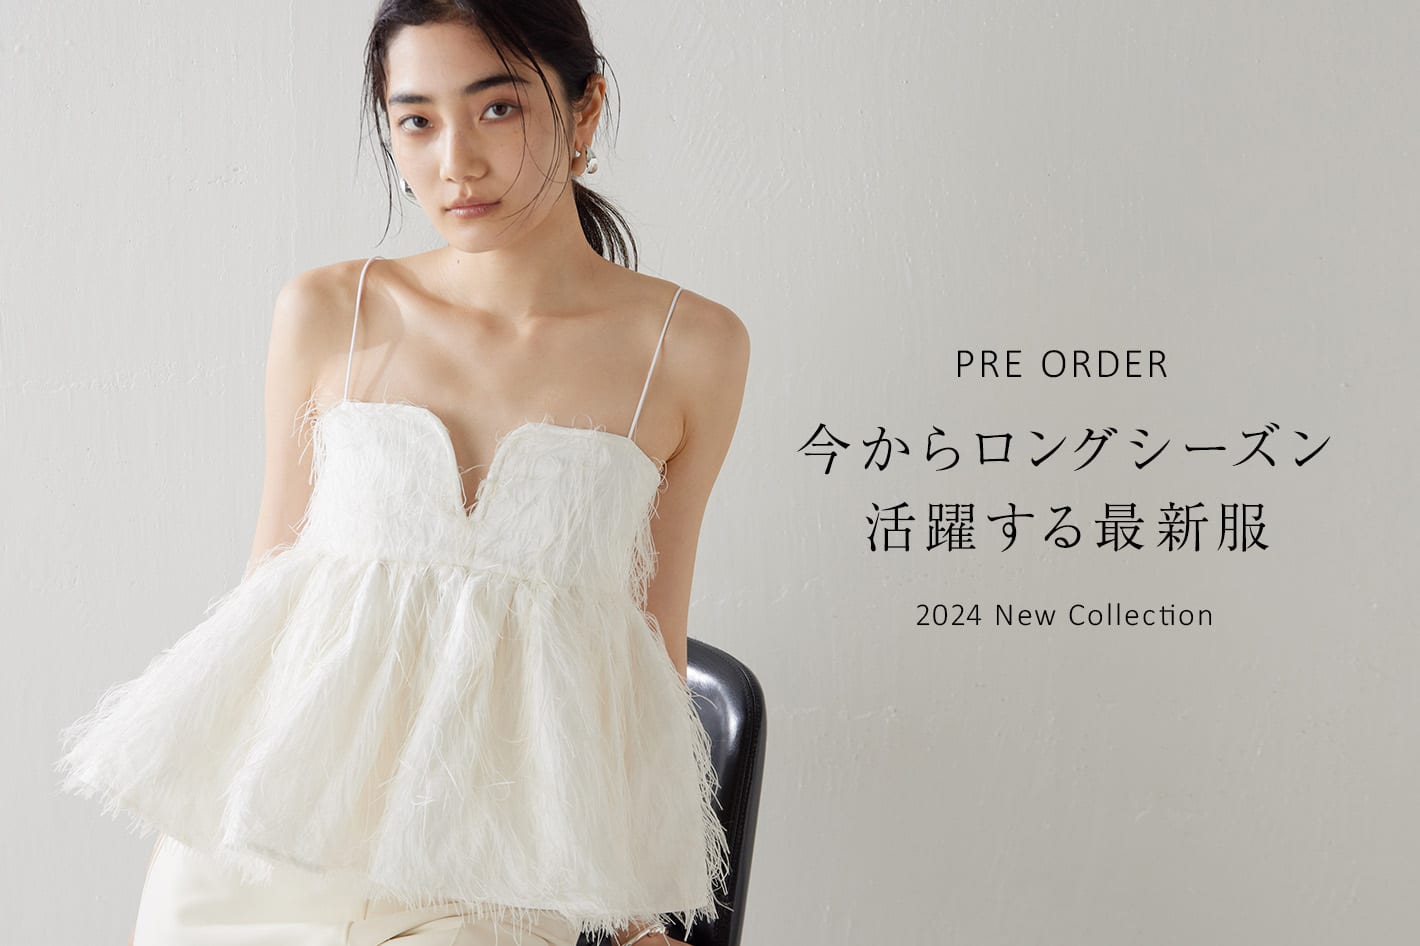 Whim Gazette 【PRE ORDER】今からロングシーズン活躍する最新服